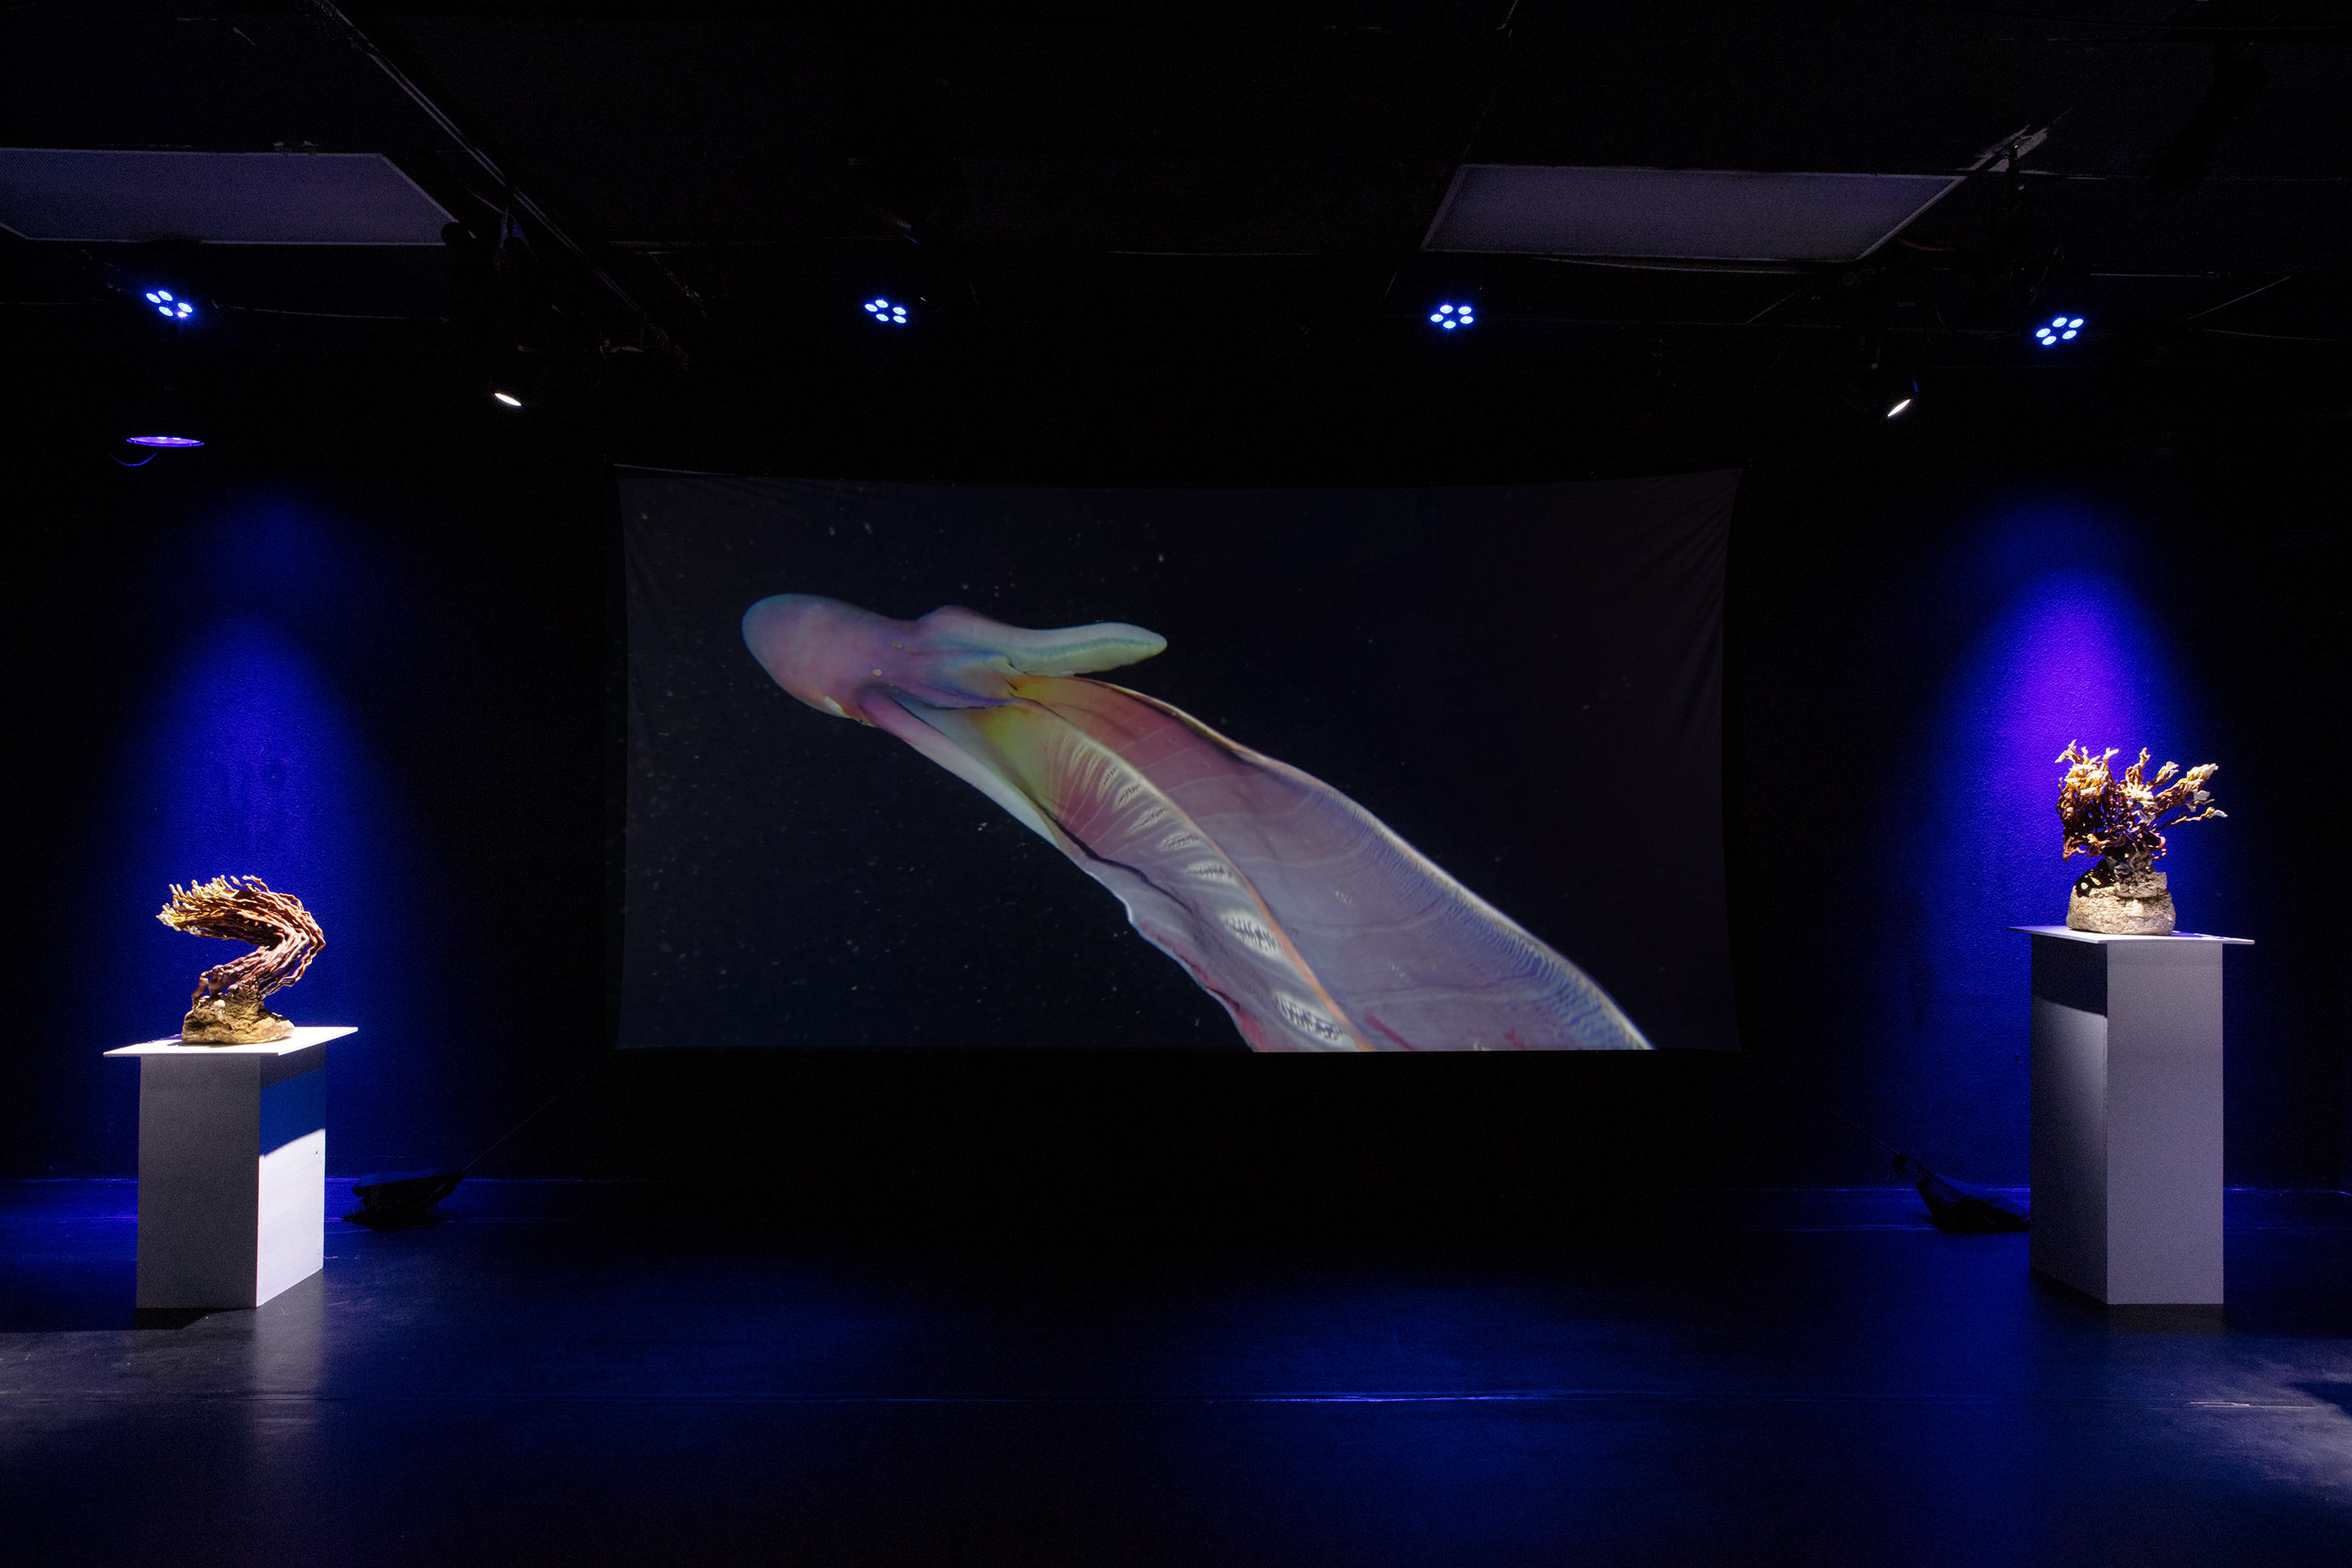 Frontal installaion view of a projecion screen in a dark theater with two sculptures on both the left and right sides of the screen illumated by spotlights